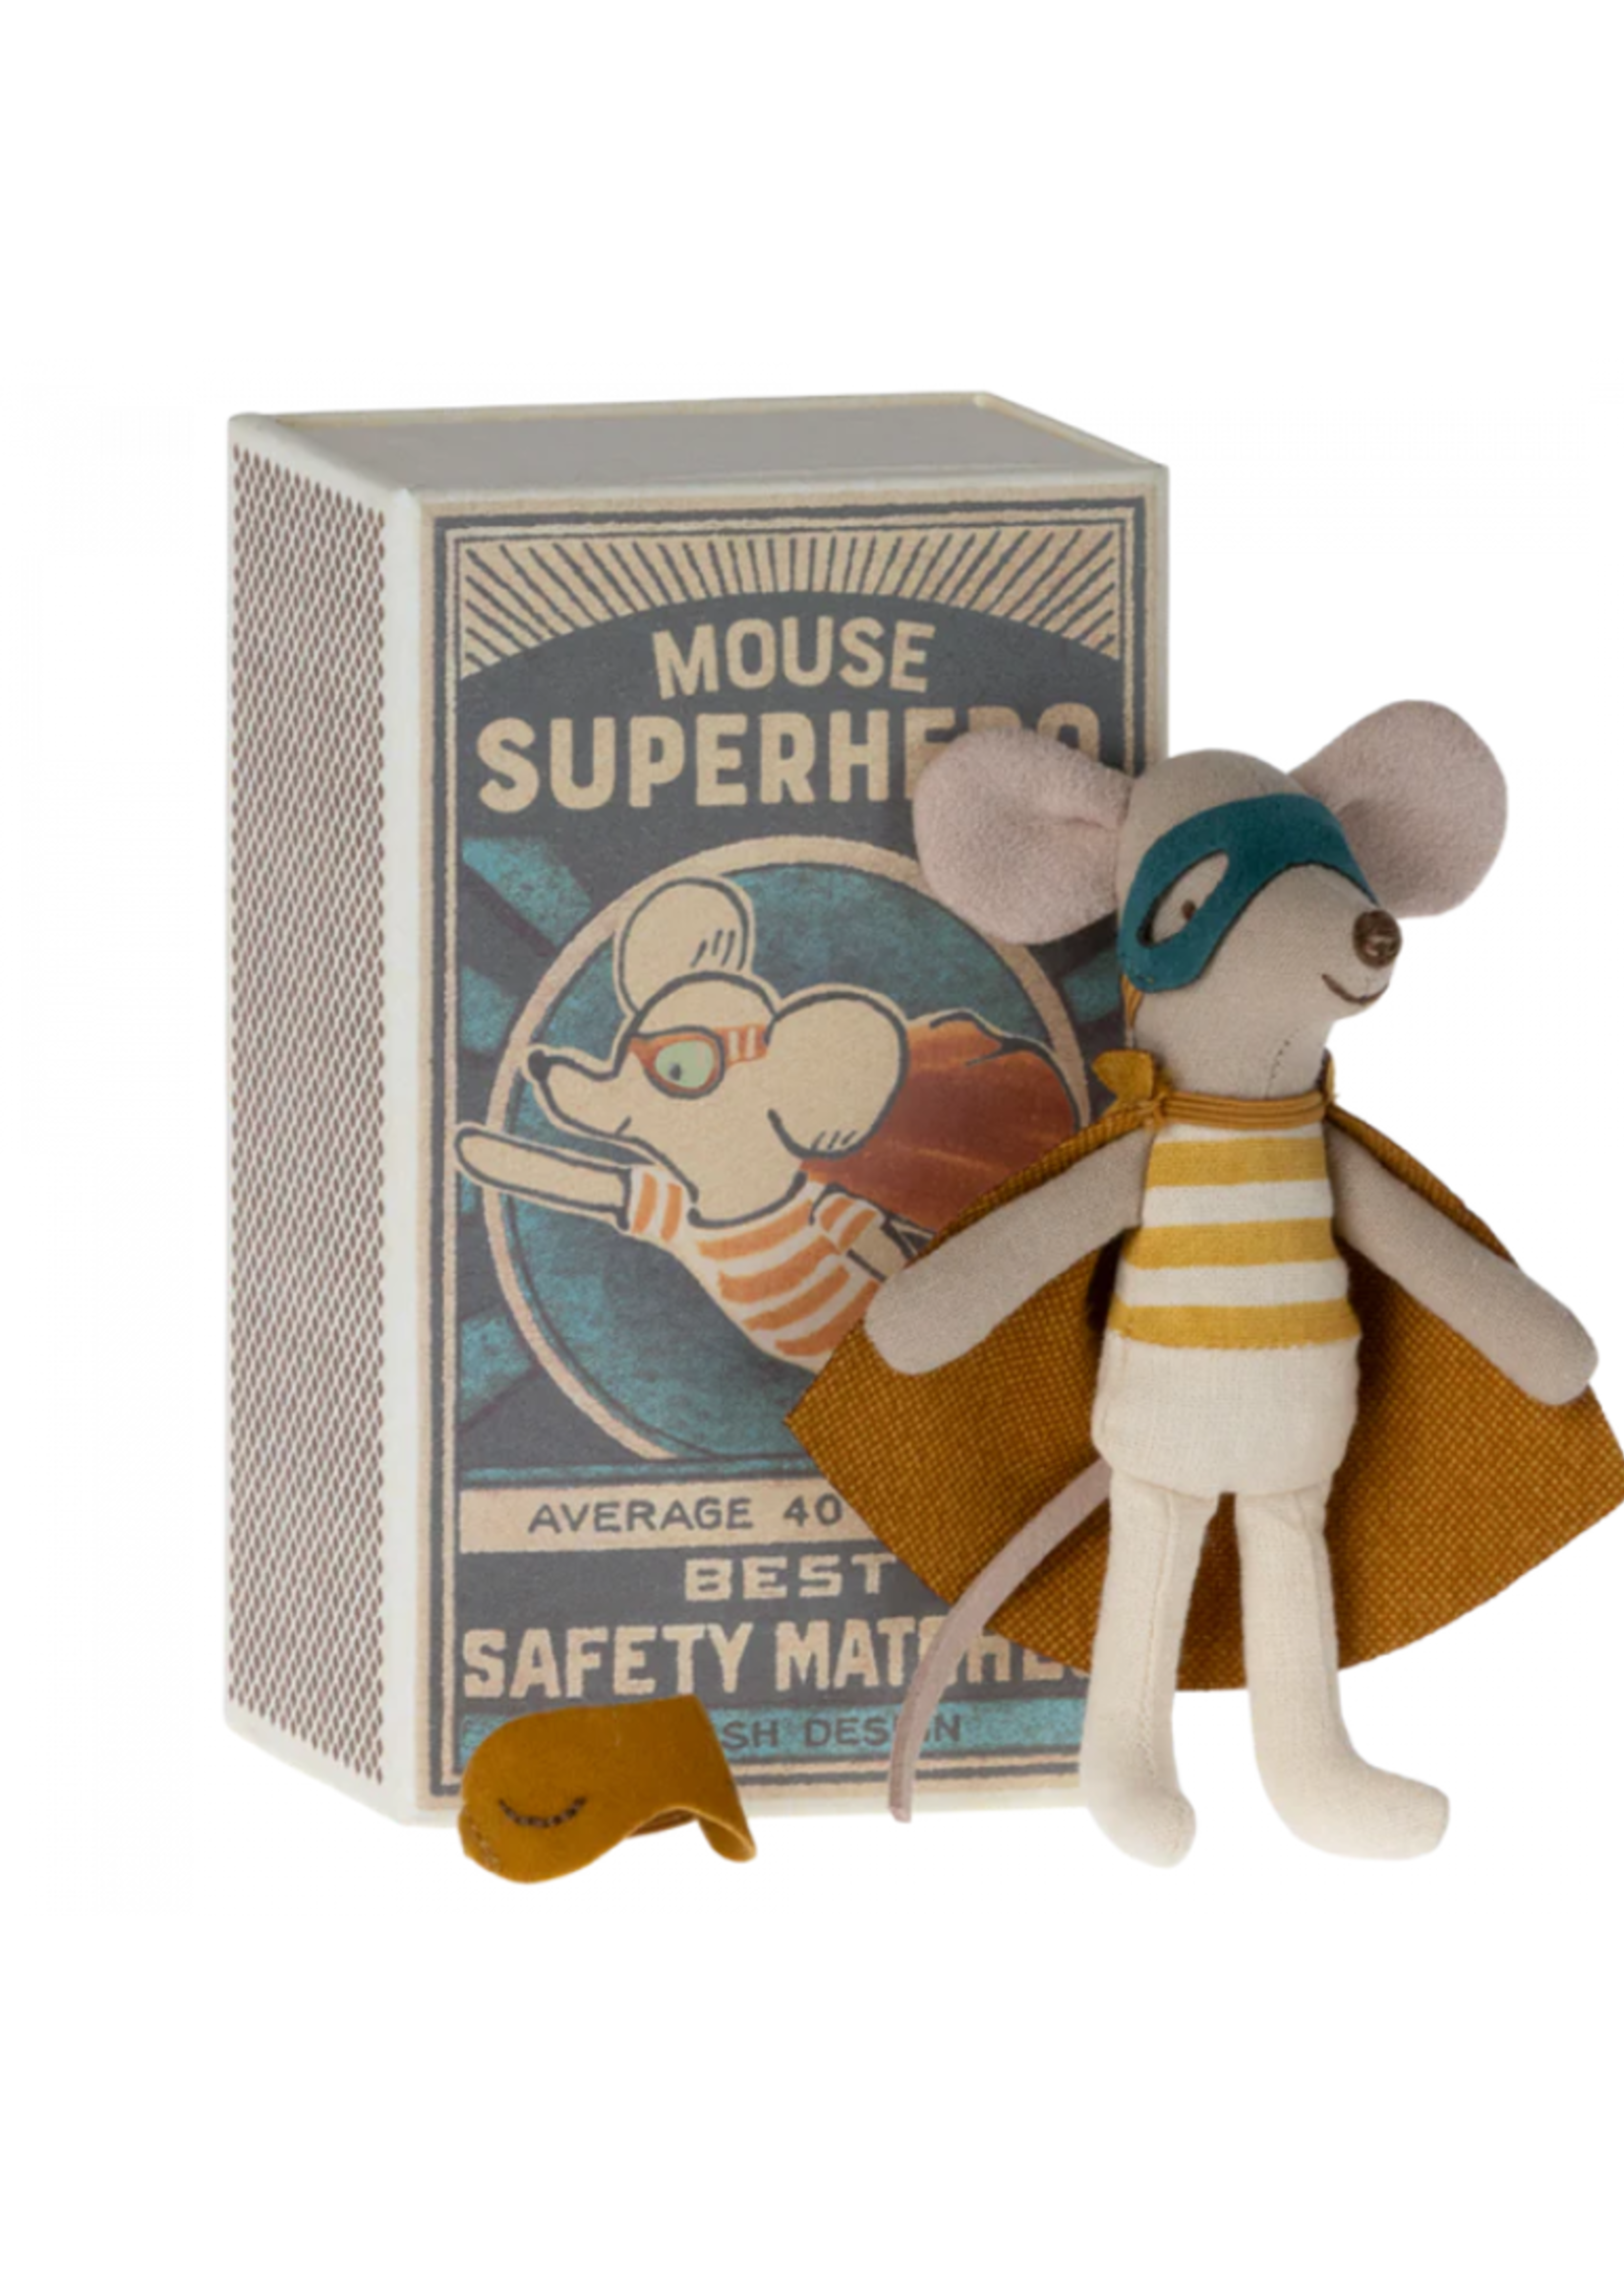 Super Hero Little Brother in Matchbox